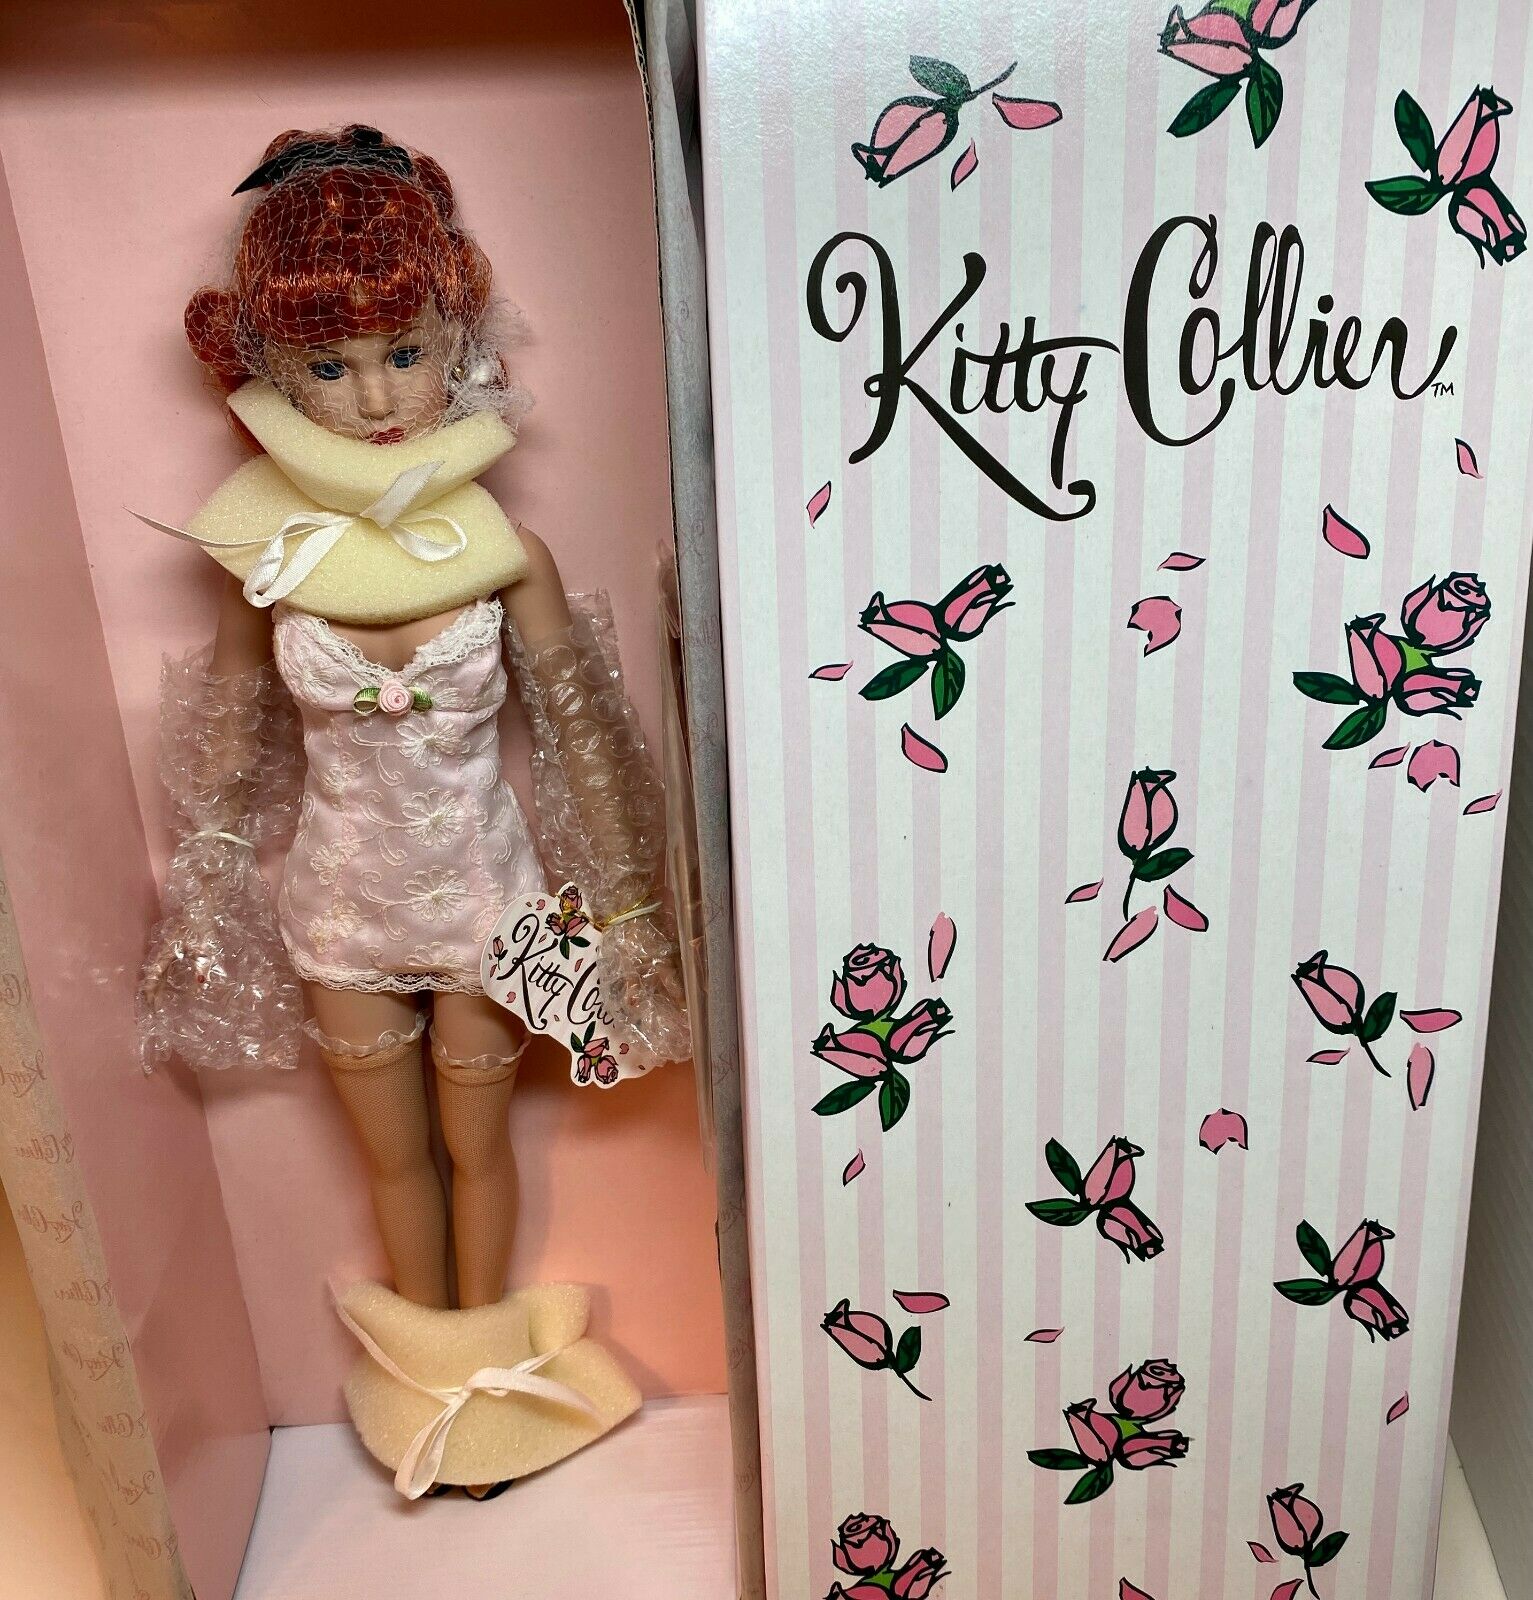 Tonner 18" 2001 Kitty Collier Basic Doll - Red Hair, Nrfb, #20402